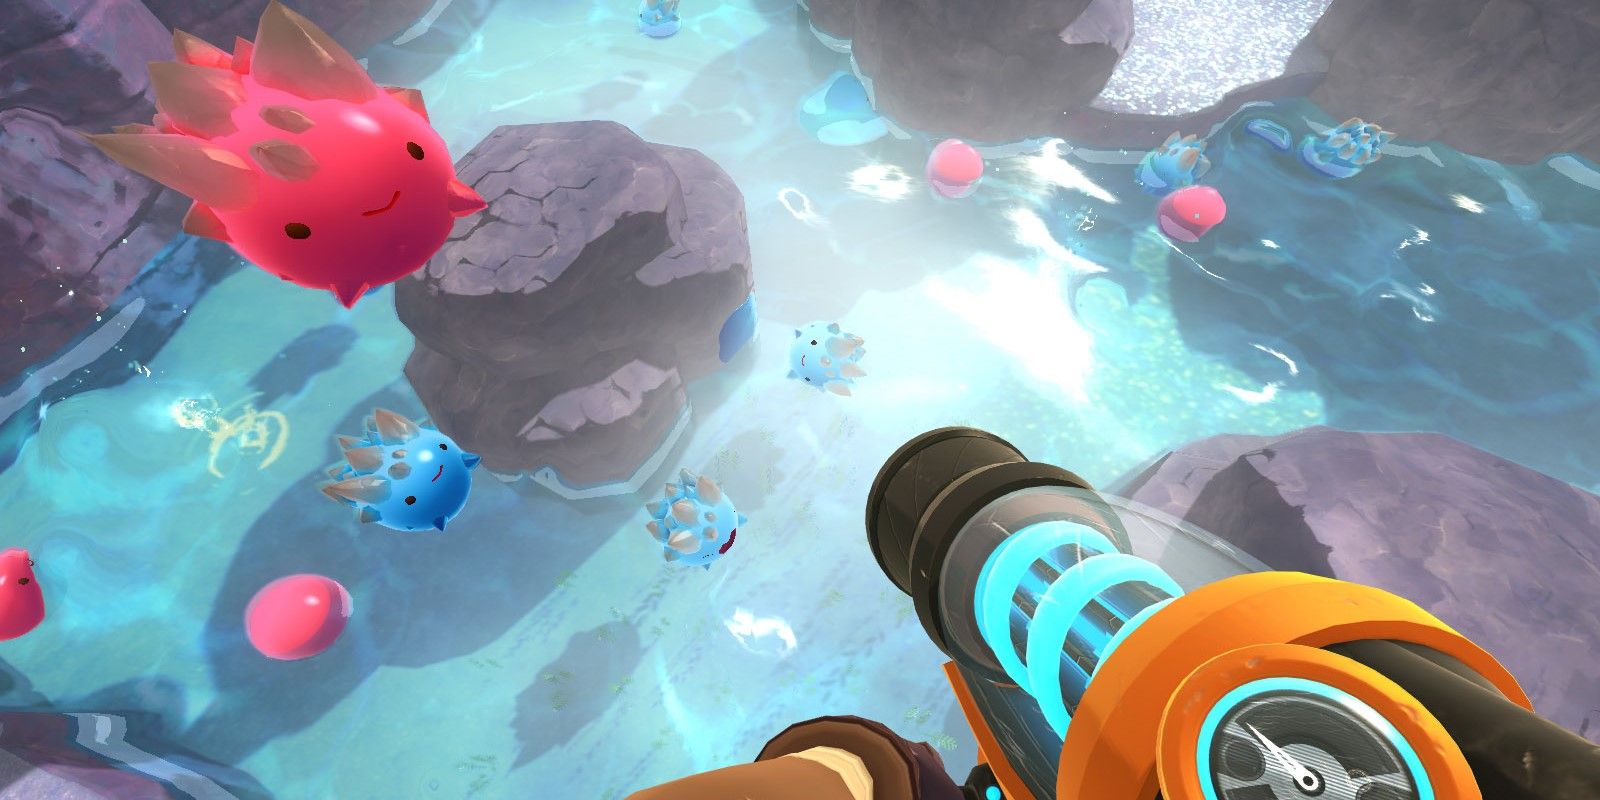 Multiplayer leads to some interesting ideas : r/slimerancher